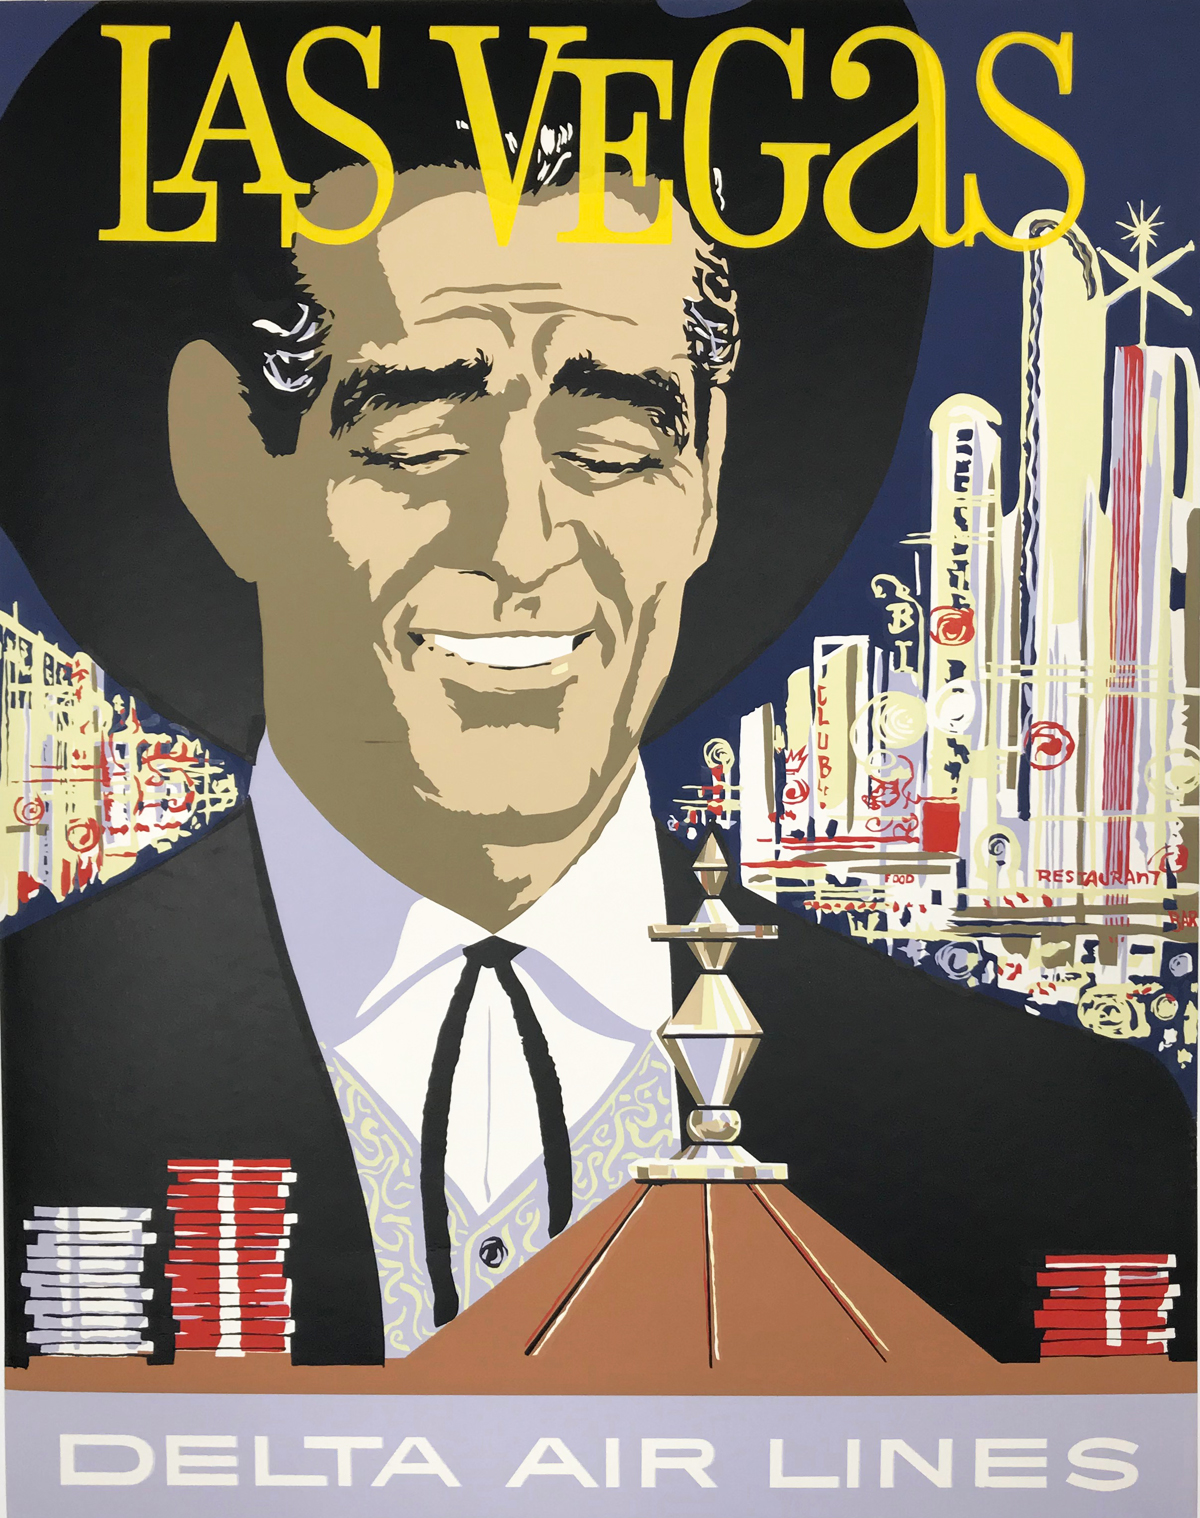 Delta Air Lines Las Vegas American original vintage poster from 1962 by John Hardy. Travel advertisement shows man looking at roulette game on a background off night city view.